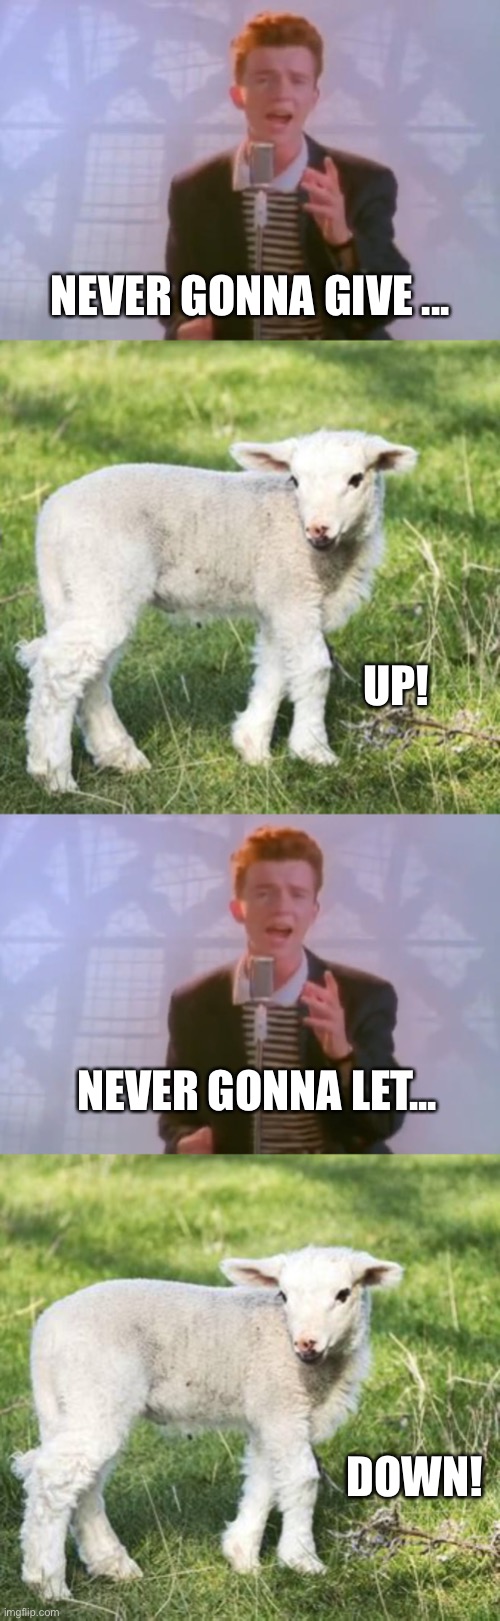 Never Gonna Give Ewe Up! |  NEVER GONNA GIVE ... UP! NEVER GONNA LET... DOWN! | image tagged in rick astley,ewe,puns,word play,memes | made w/ Imgflip meme maker